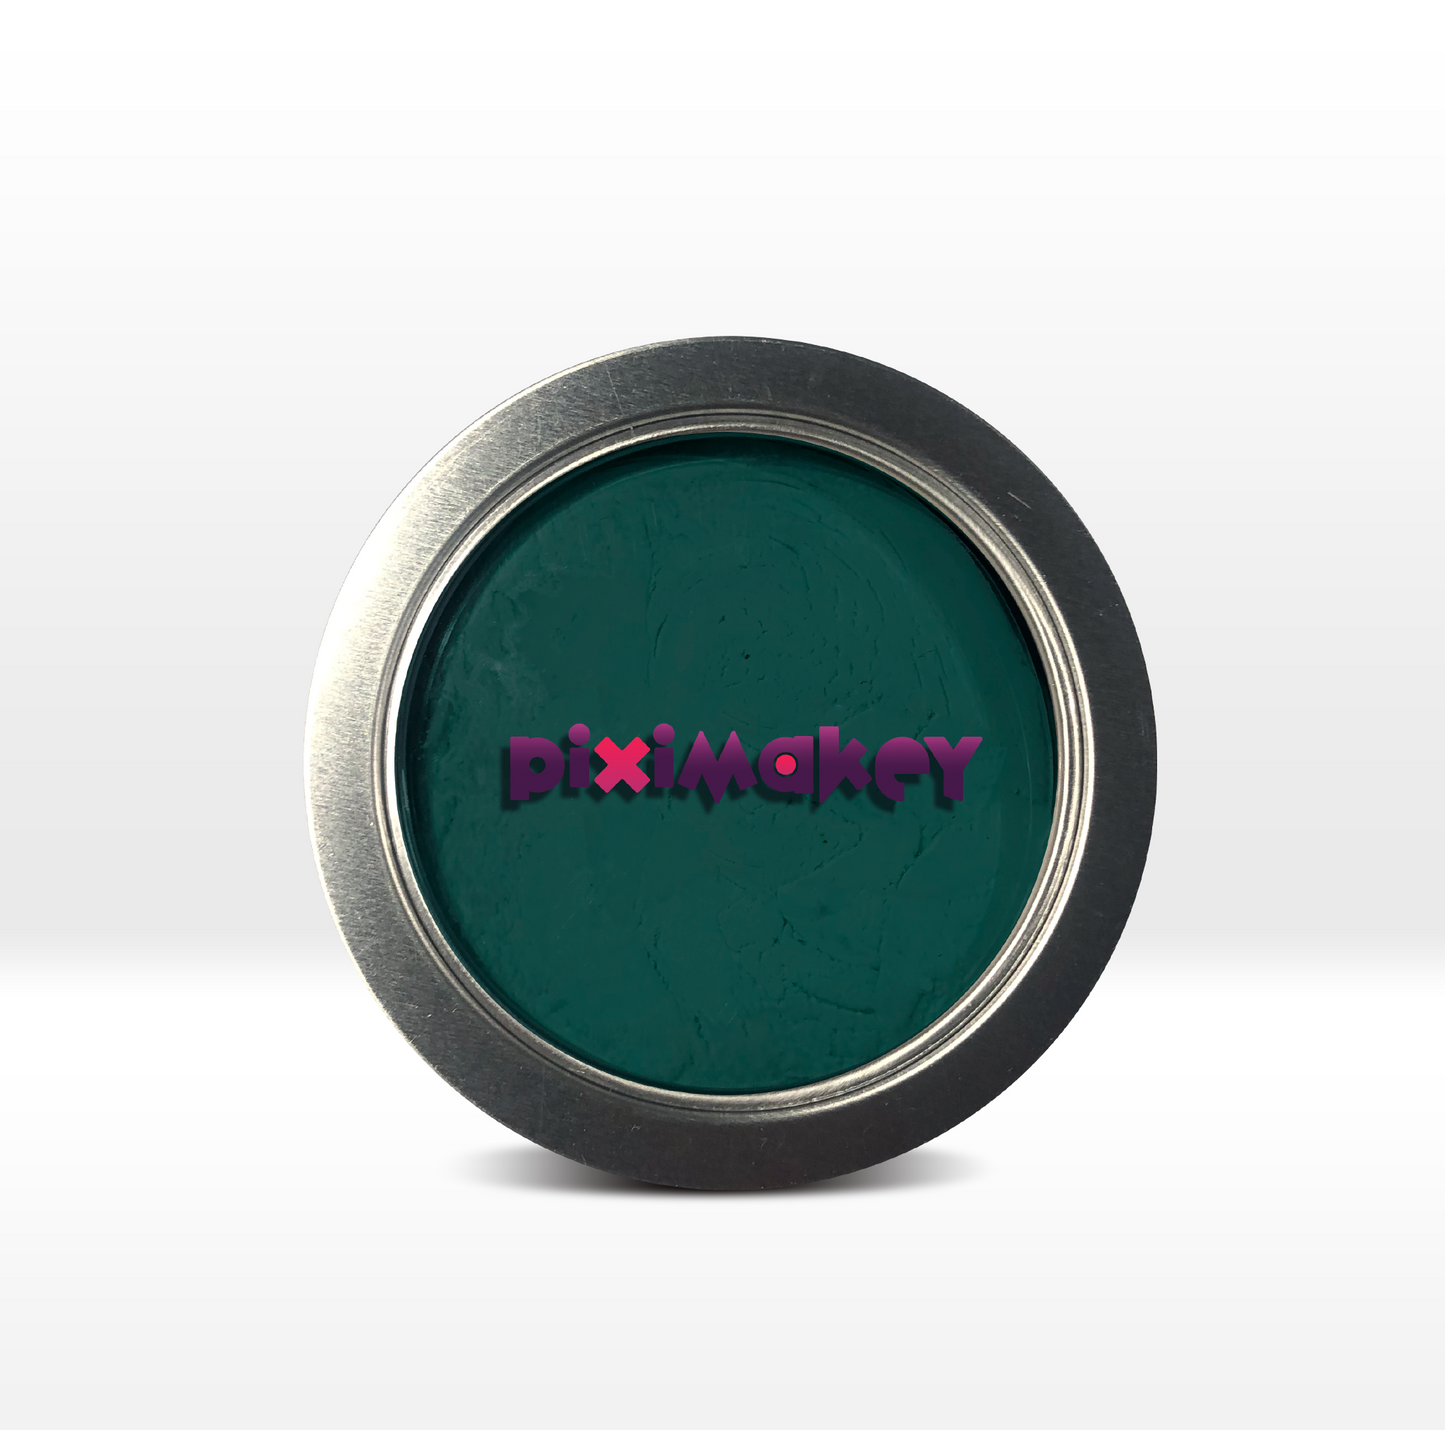 Piximakey Animation Clay "Mother Earth" 5 X Clay  Tin Cans  á 150g